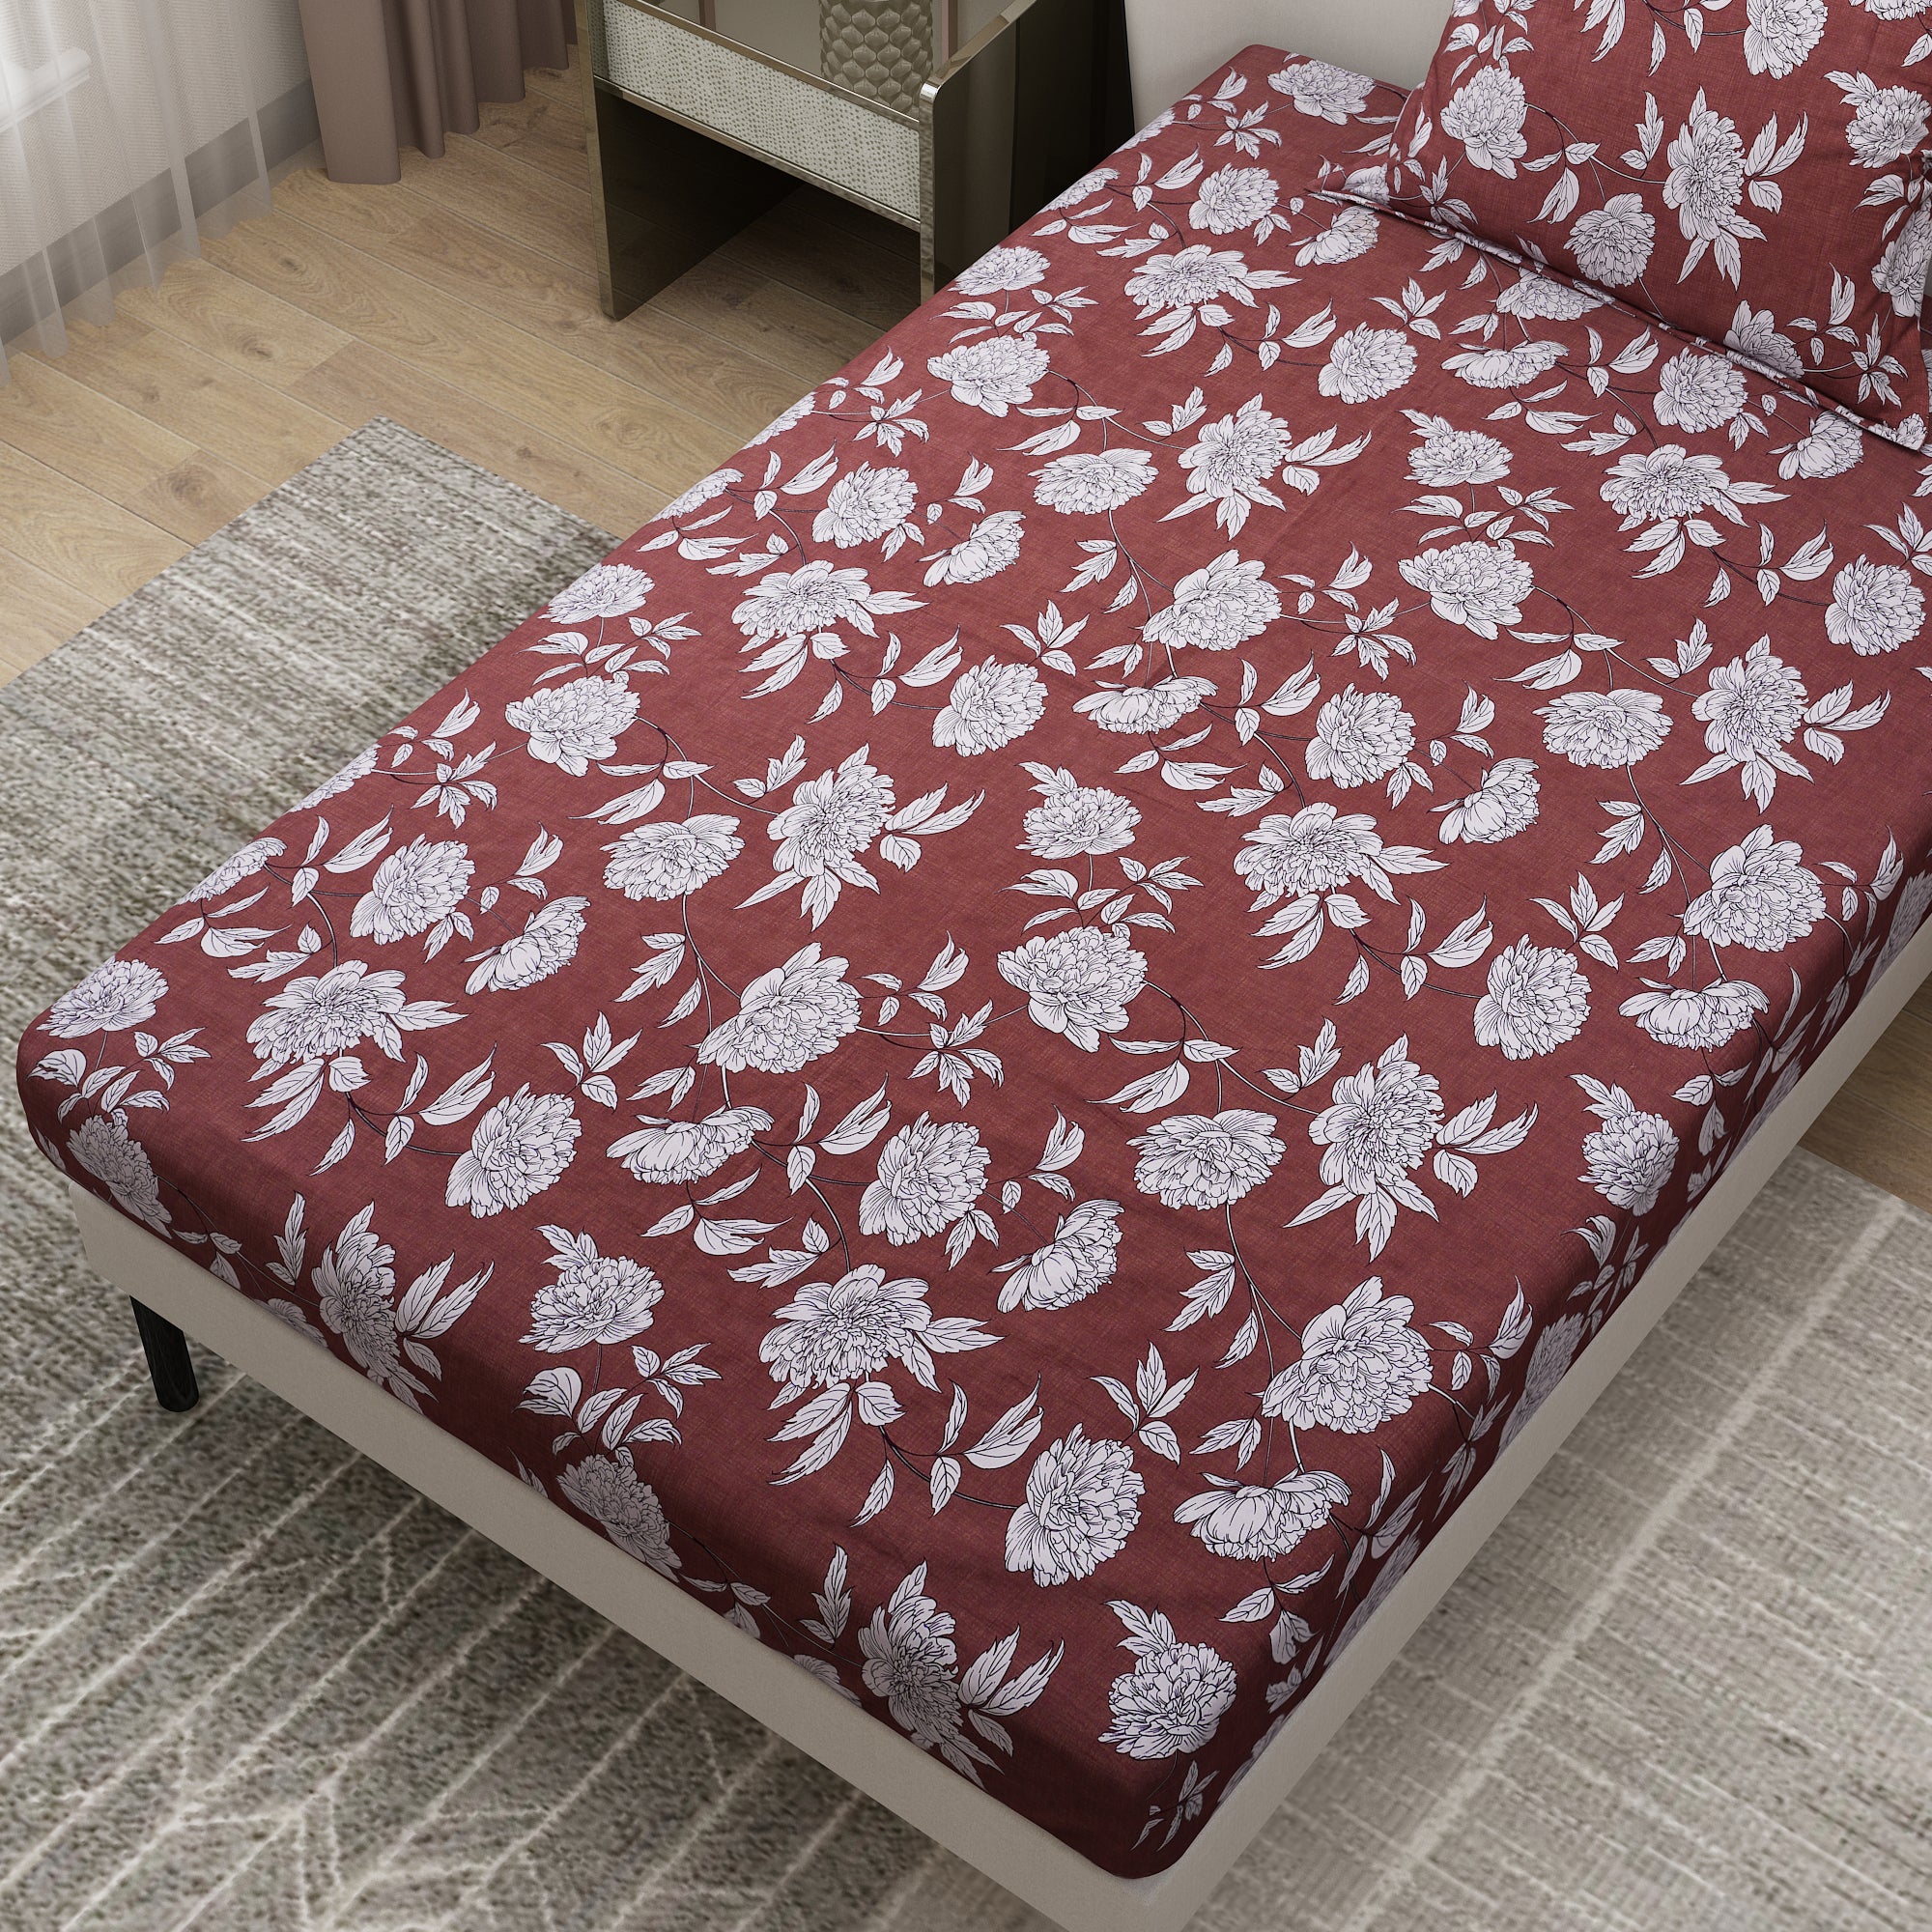 Colorful Printed Flower Design Bedsheet With Pillow Covers | Dream Care